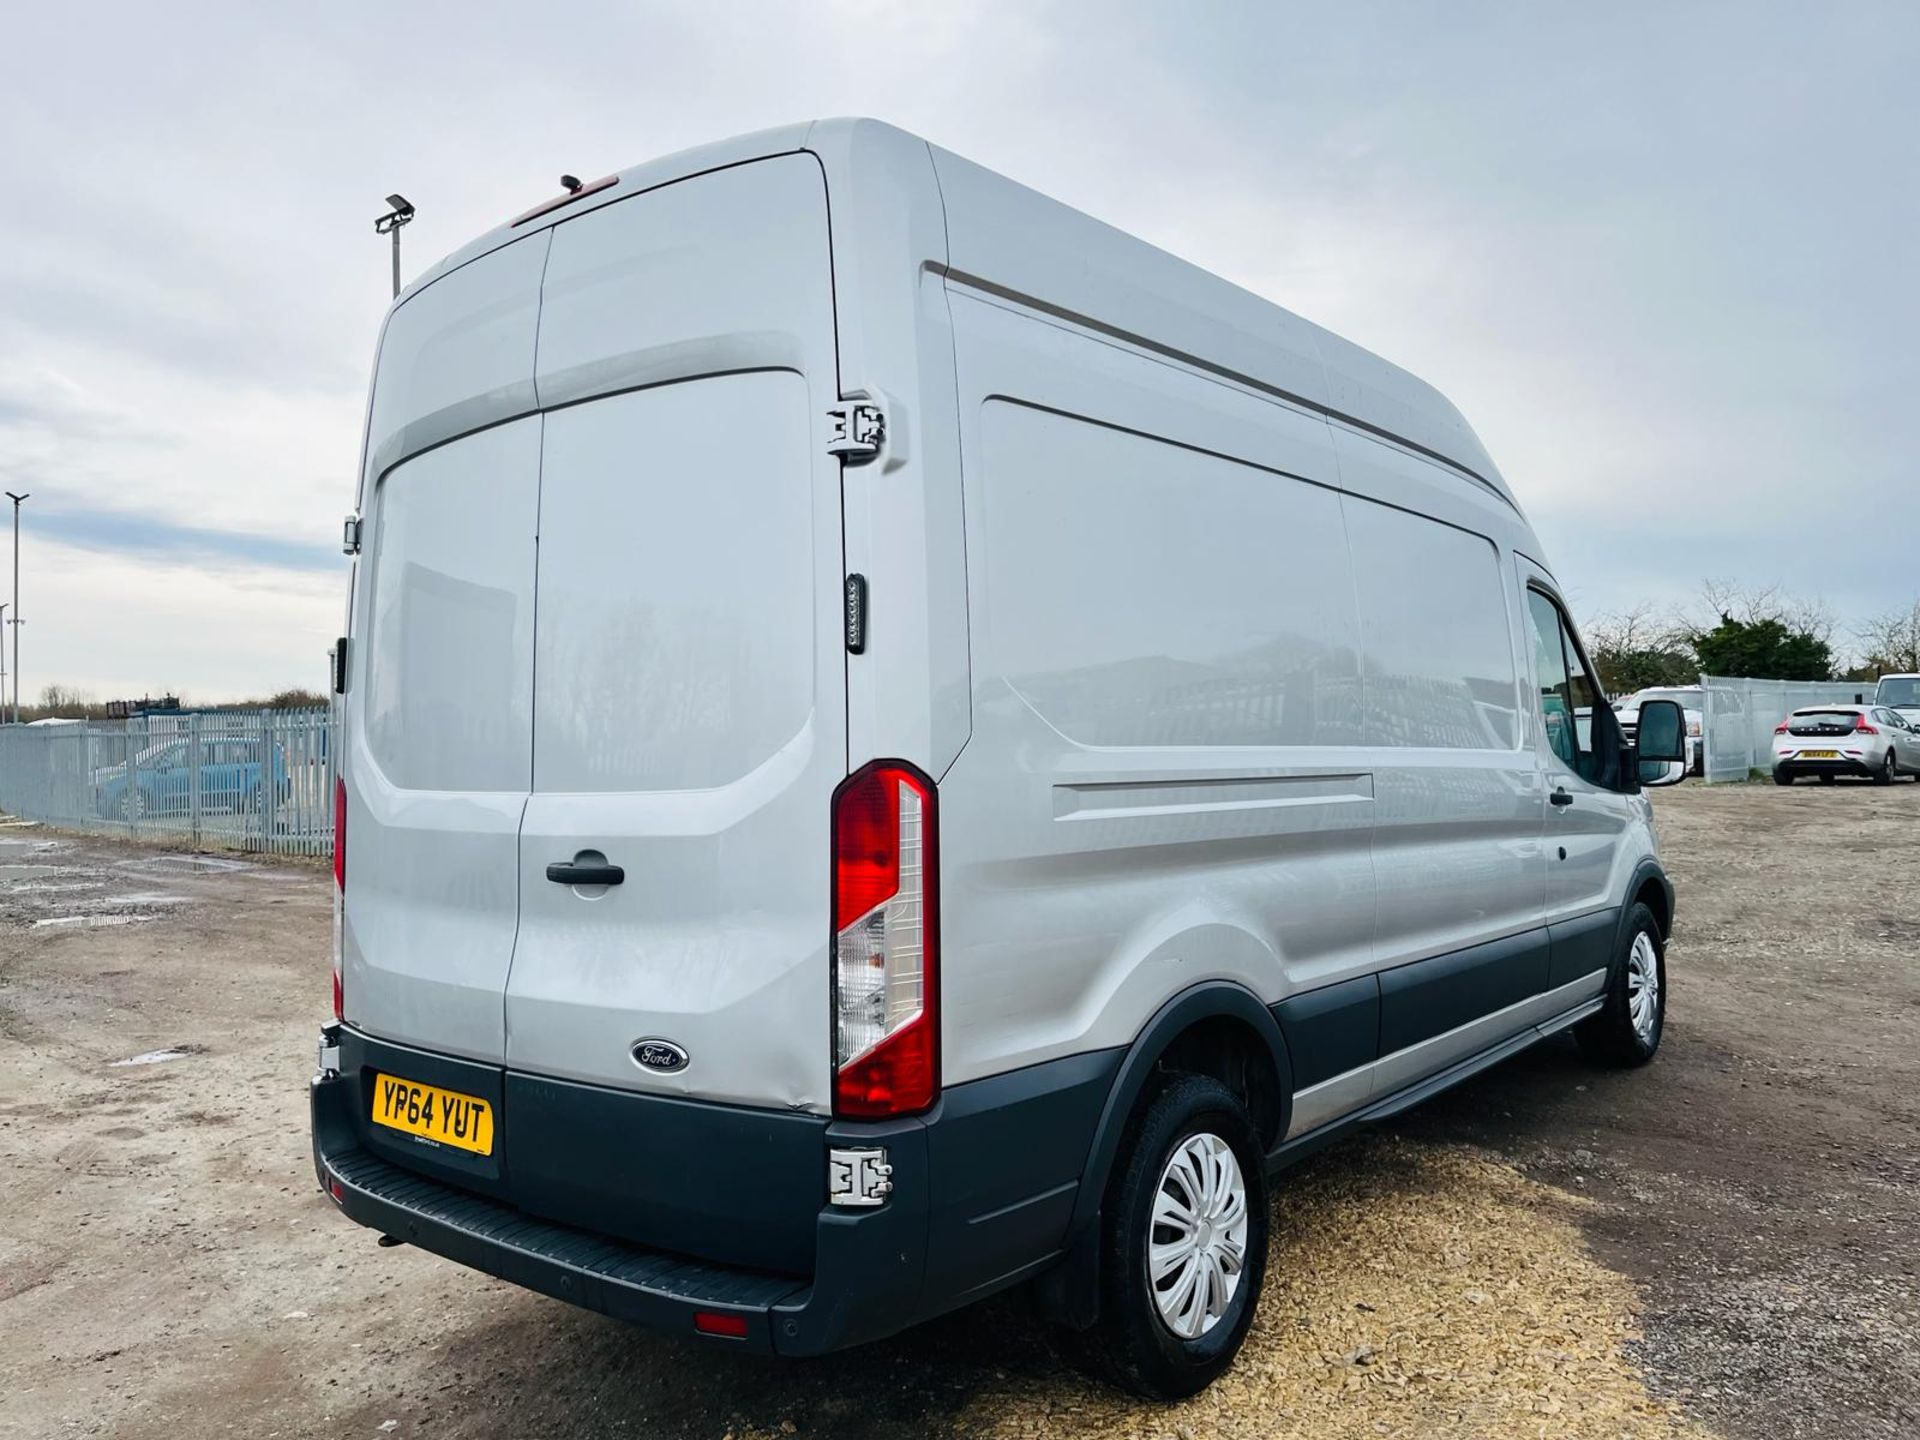 ** ON SALE ** Ford Transit Trend 350 TDCI 125 2.2 L3 H3 2014 '64 Reg' - Parking sensors - Air Con - Image 12 of 27